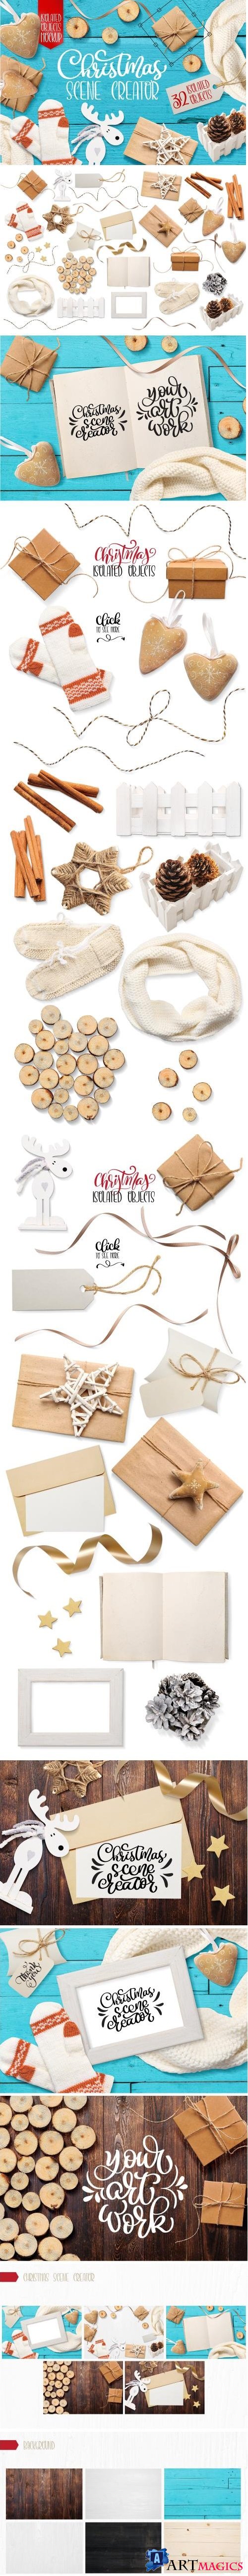 Christmas Scenes, Isolated Items - 2130871